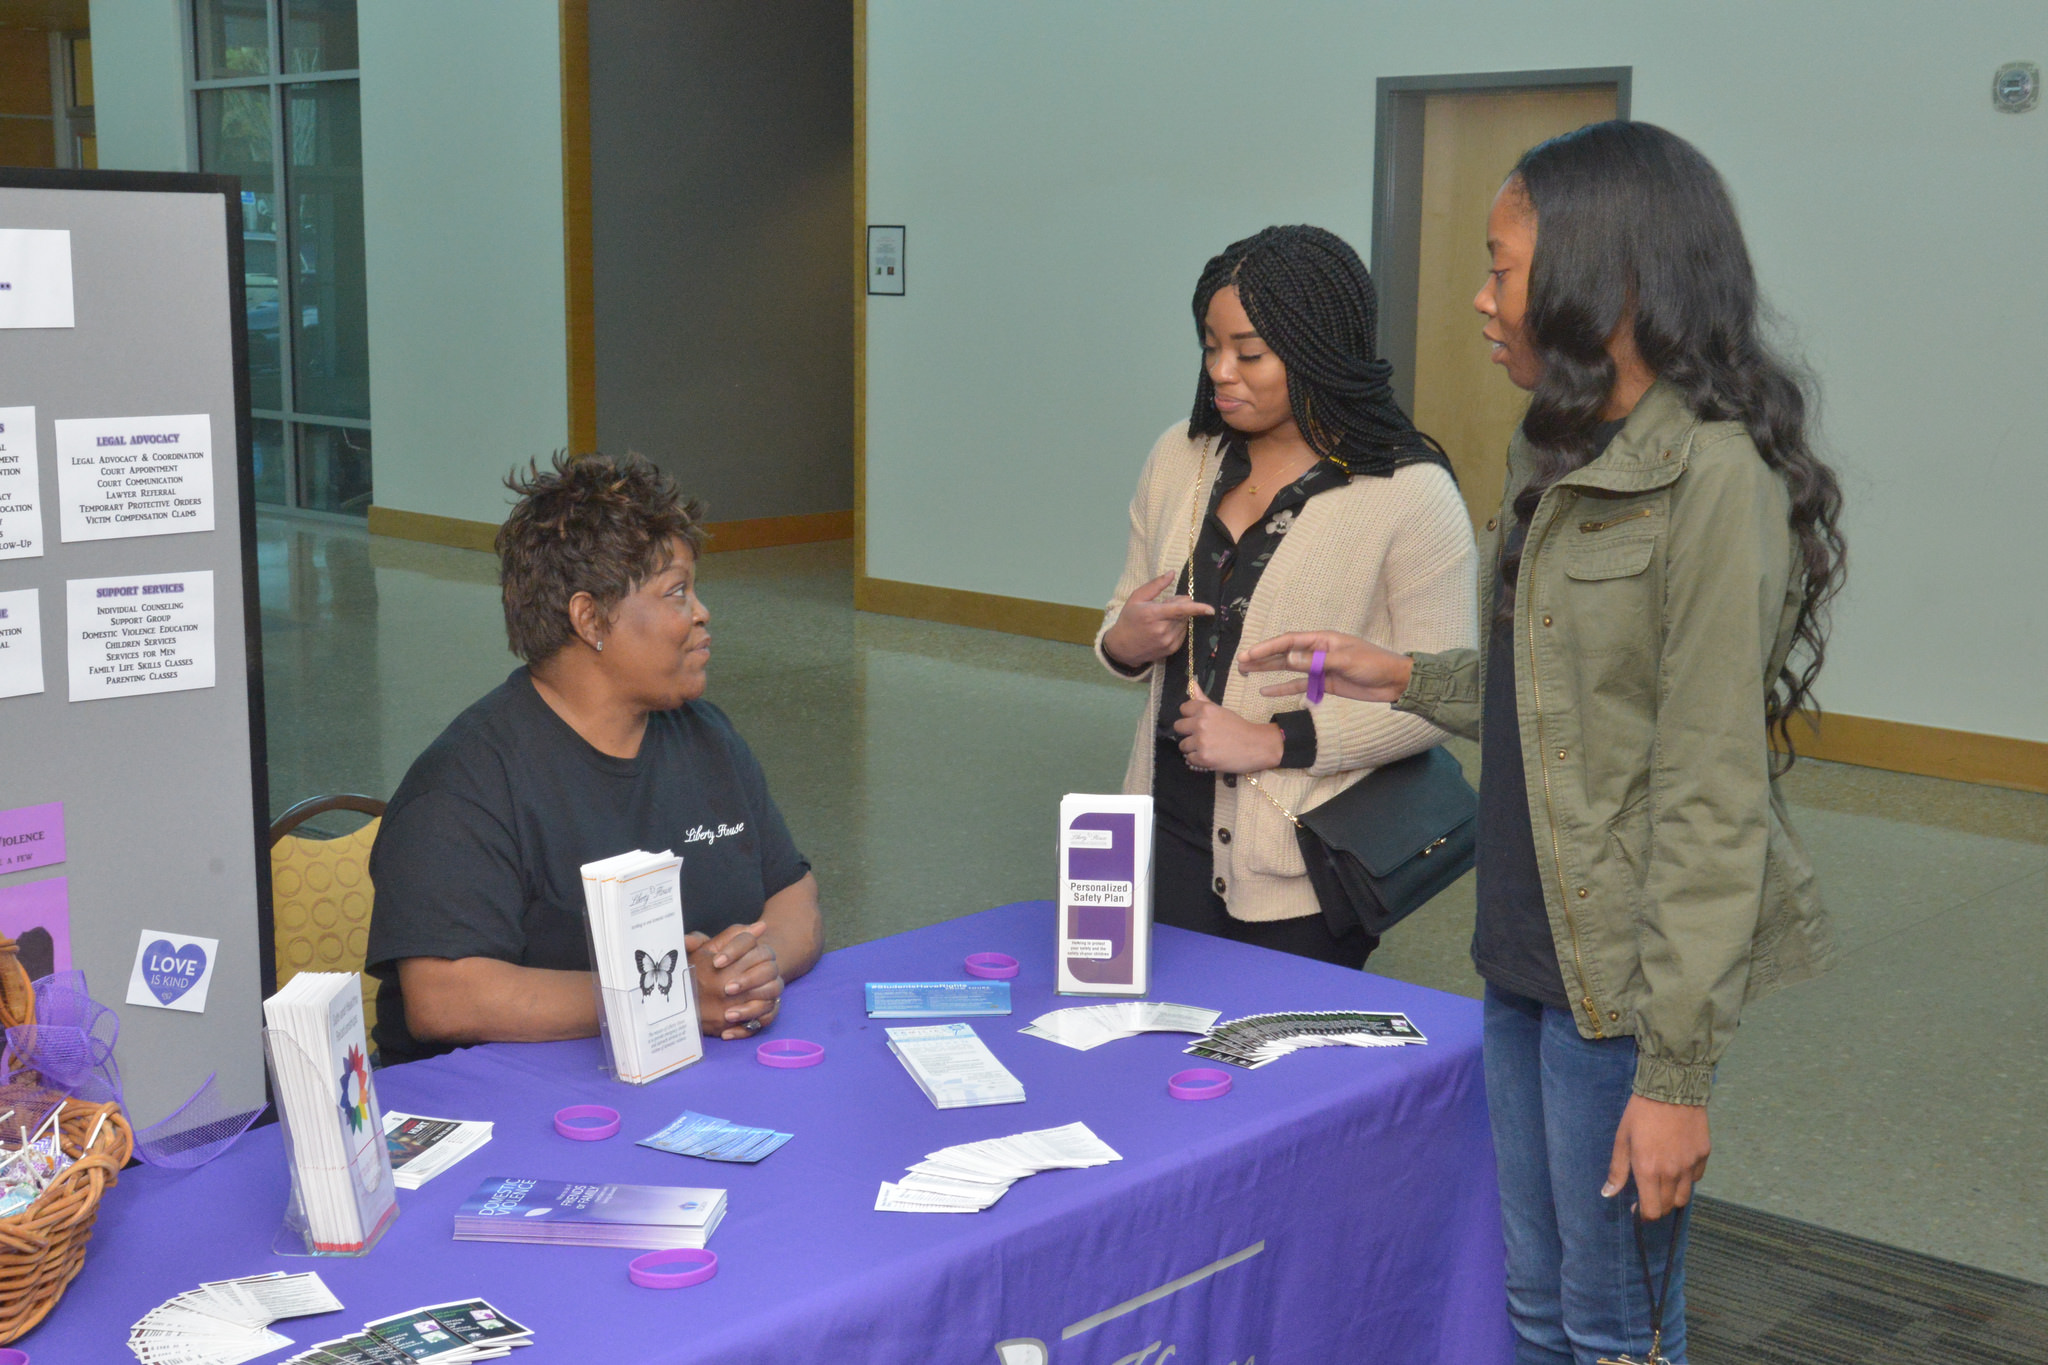 Debra Davis, Liberty House shelter advocate, Courtney Jenkins, Liberty House intern, and T'Aandre Sears, outreach advocate, provided resources to students at the Dating Violence Maze activity.